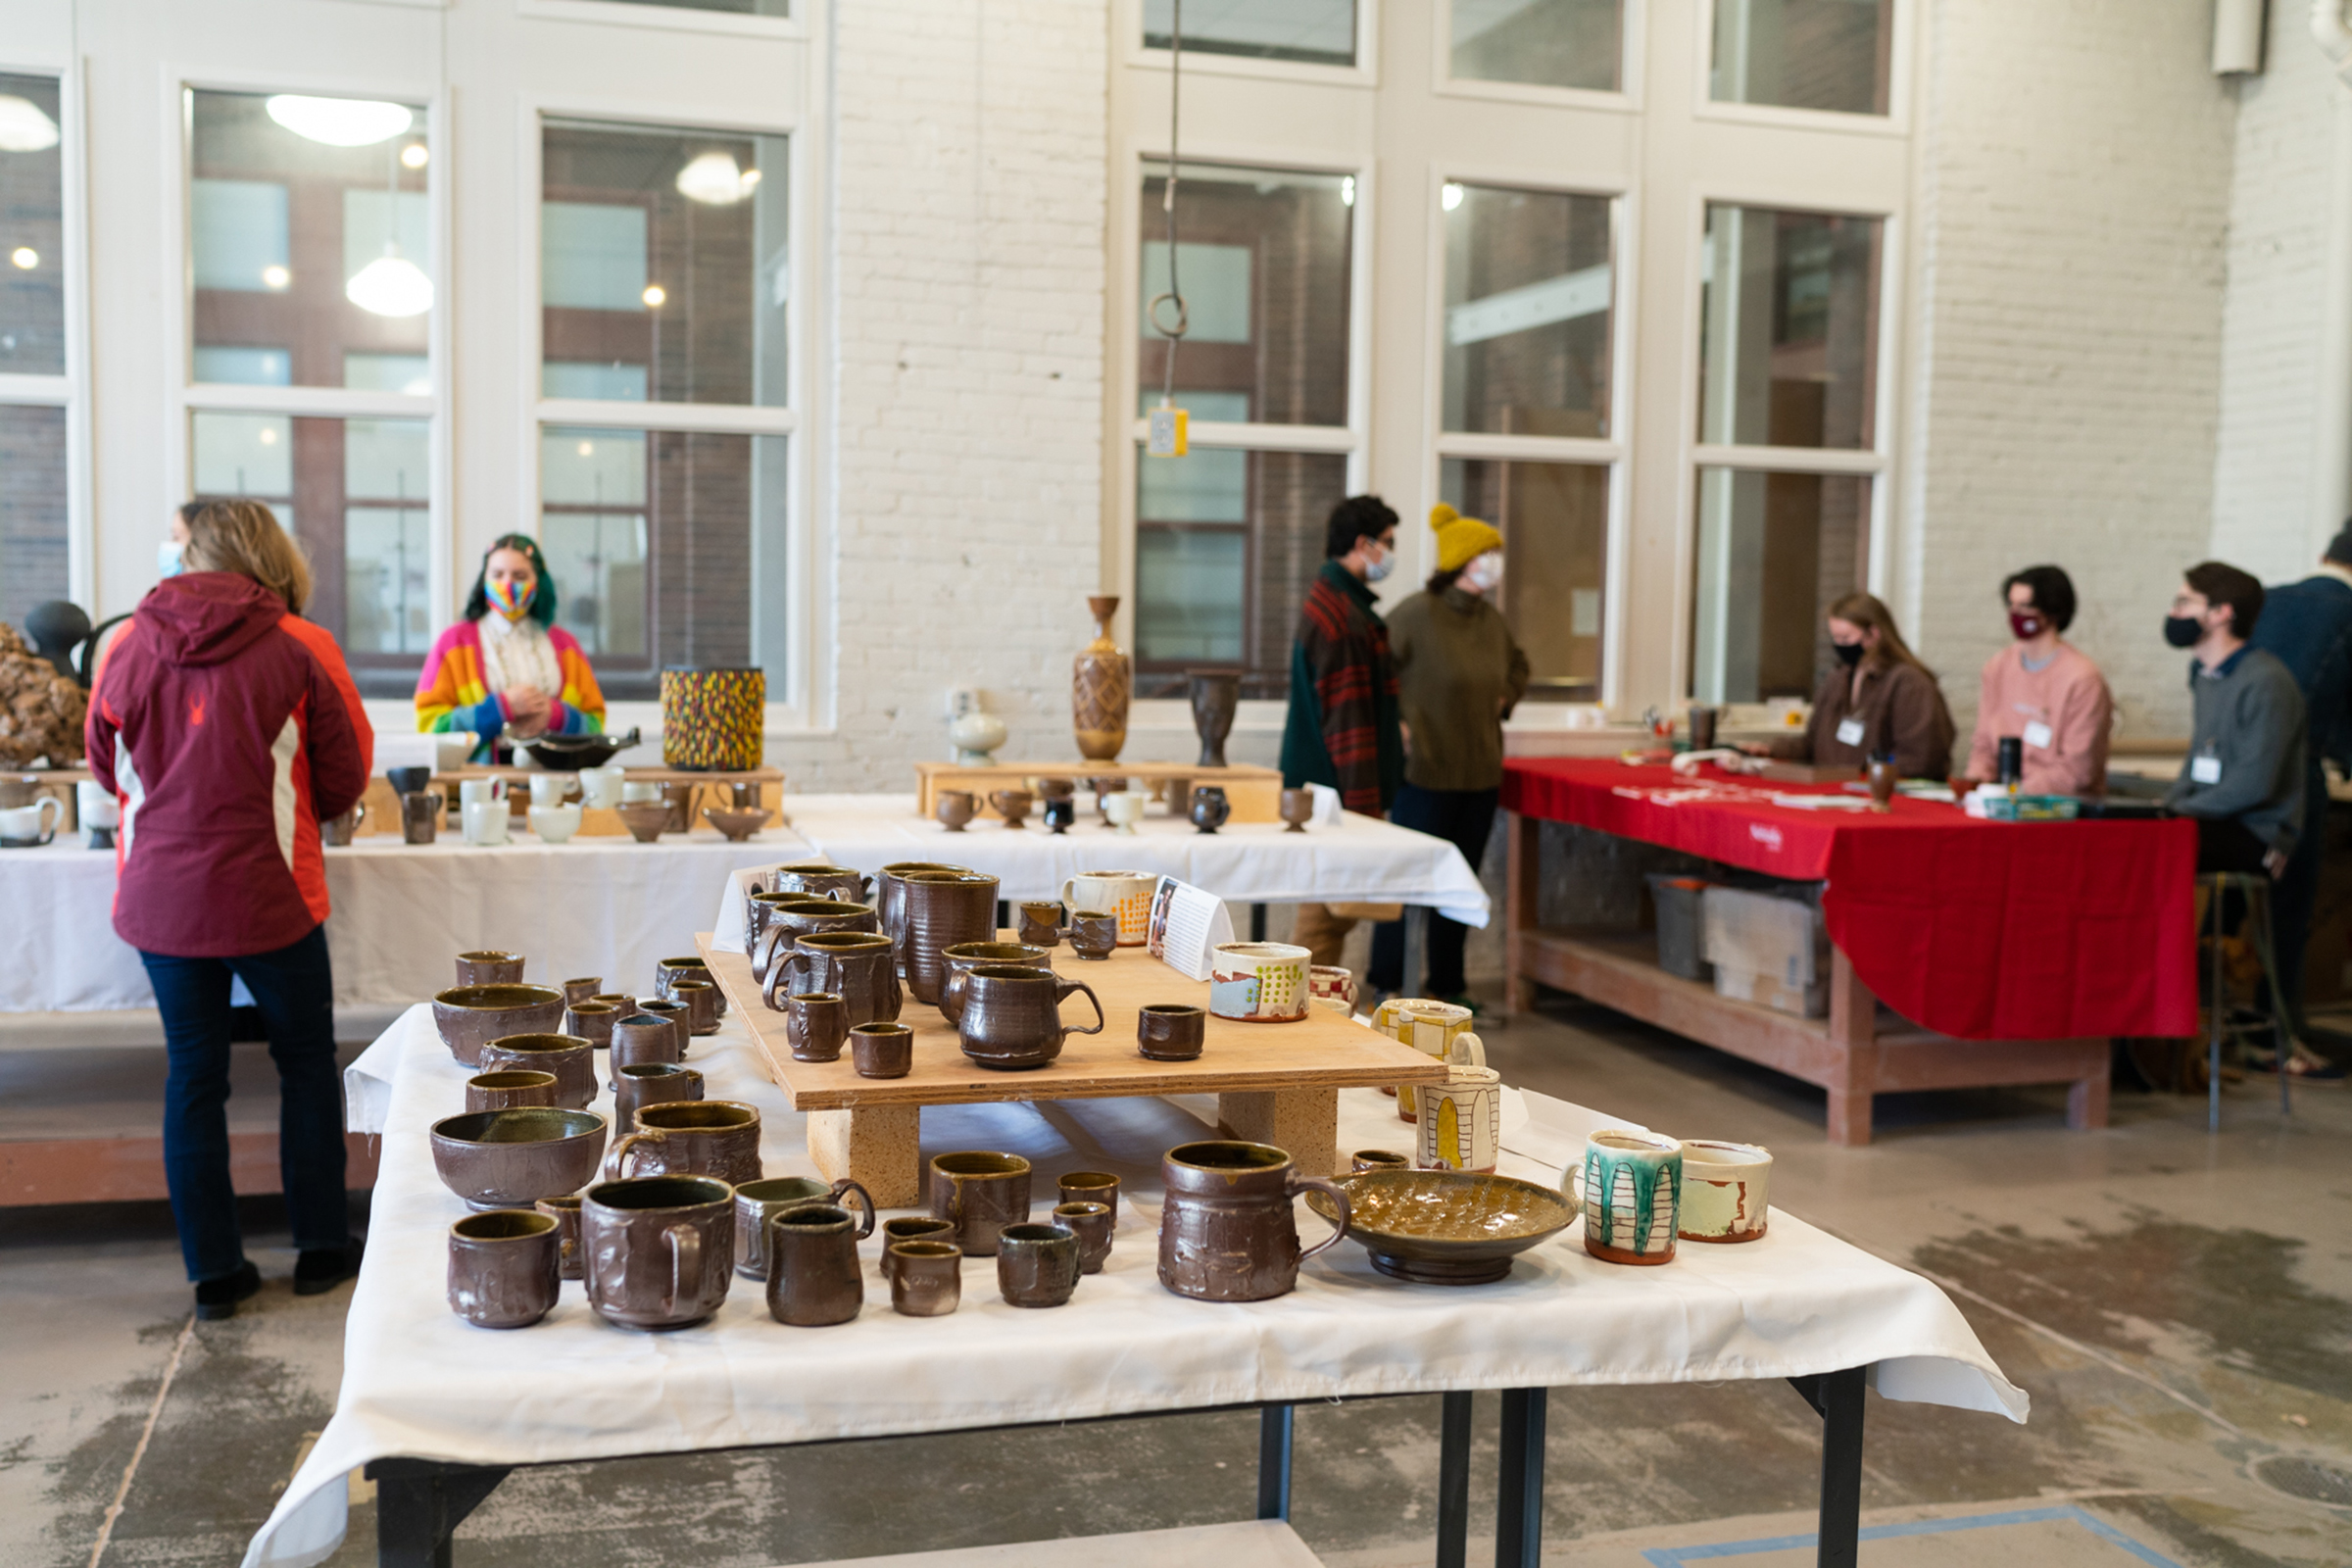 The Clay Club Sale and UNL Photo Club Sale are May 6-7 in Richards Hall Rms. 117 and 112. Support the work of talented School of Art, Art History & Design student artists by purchasing their most recent work.